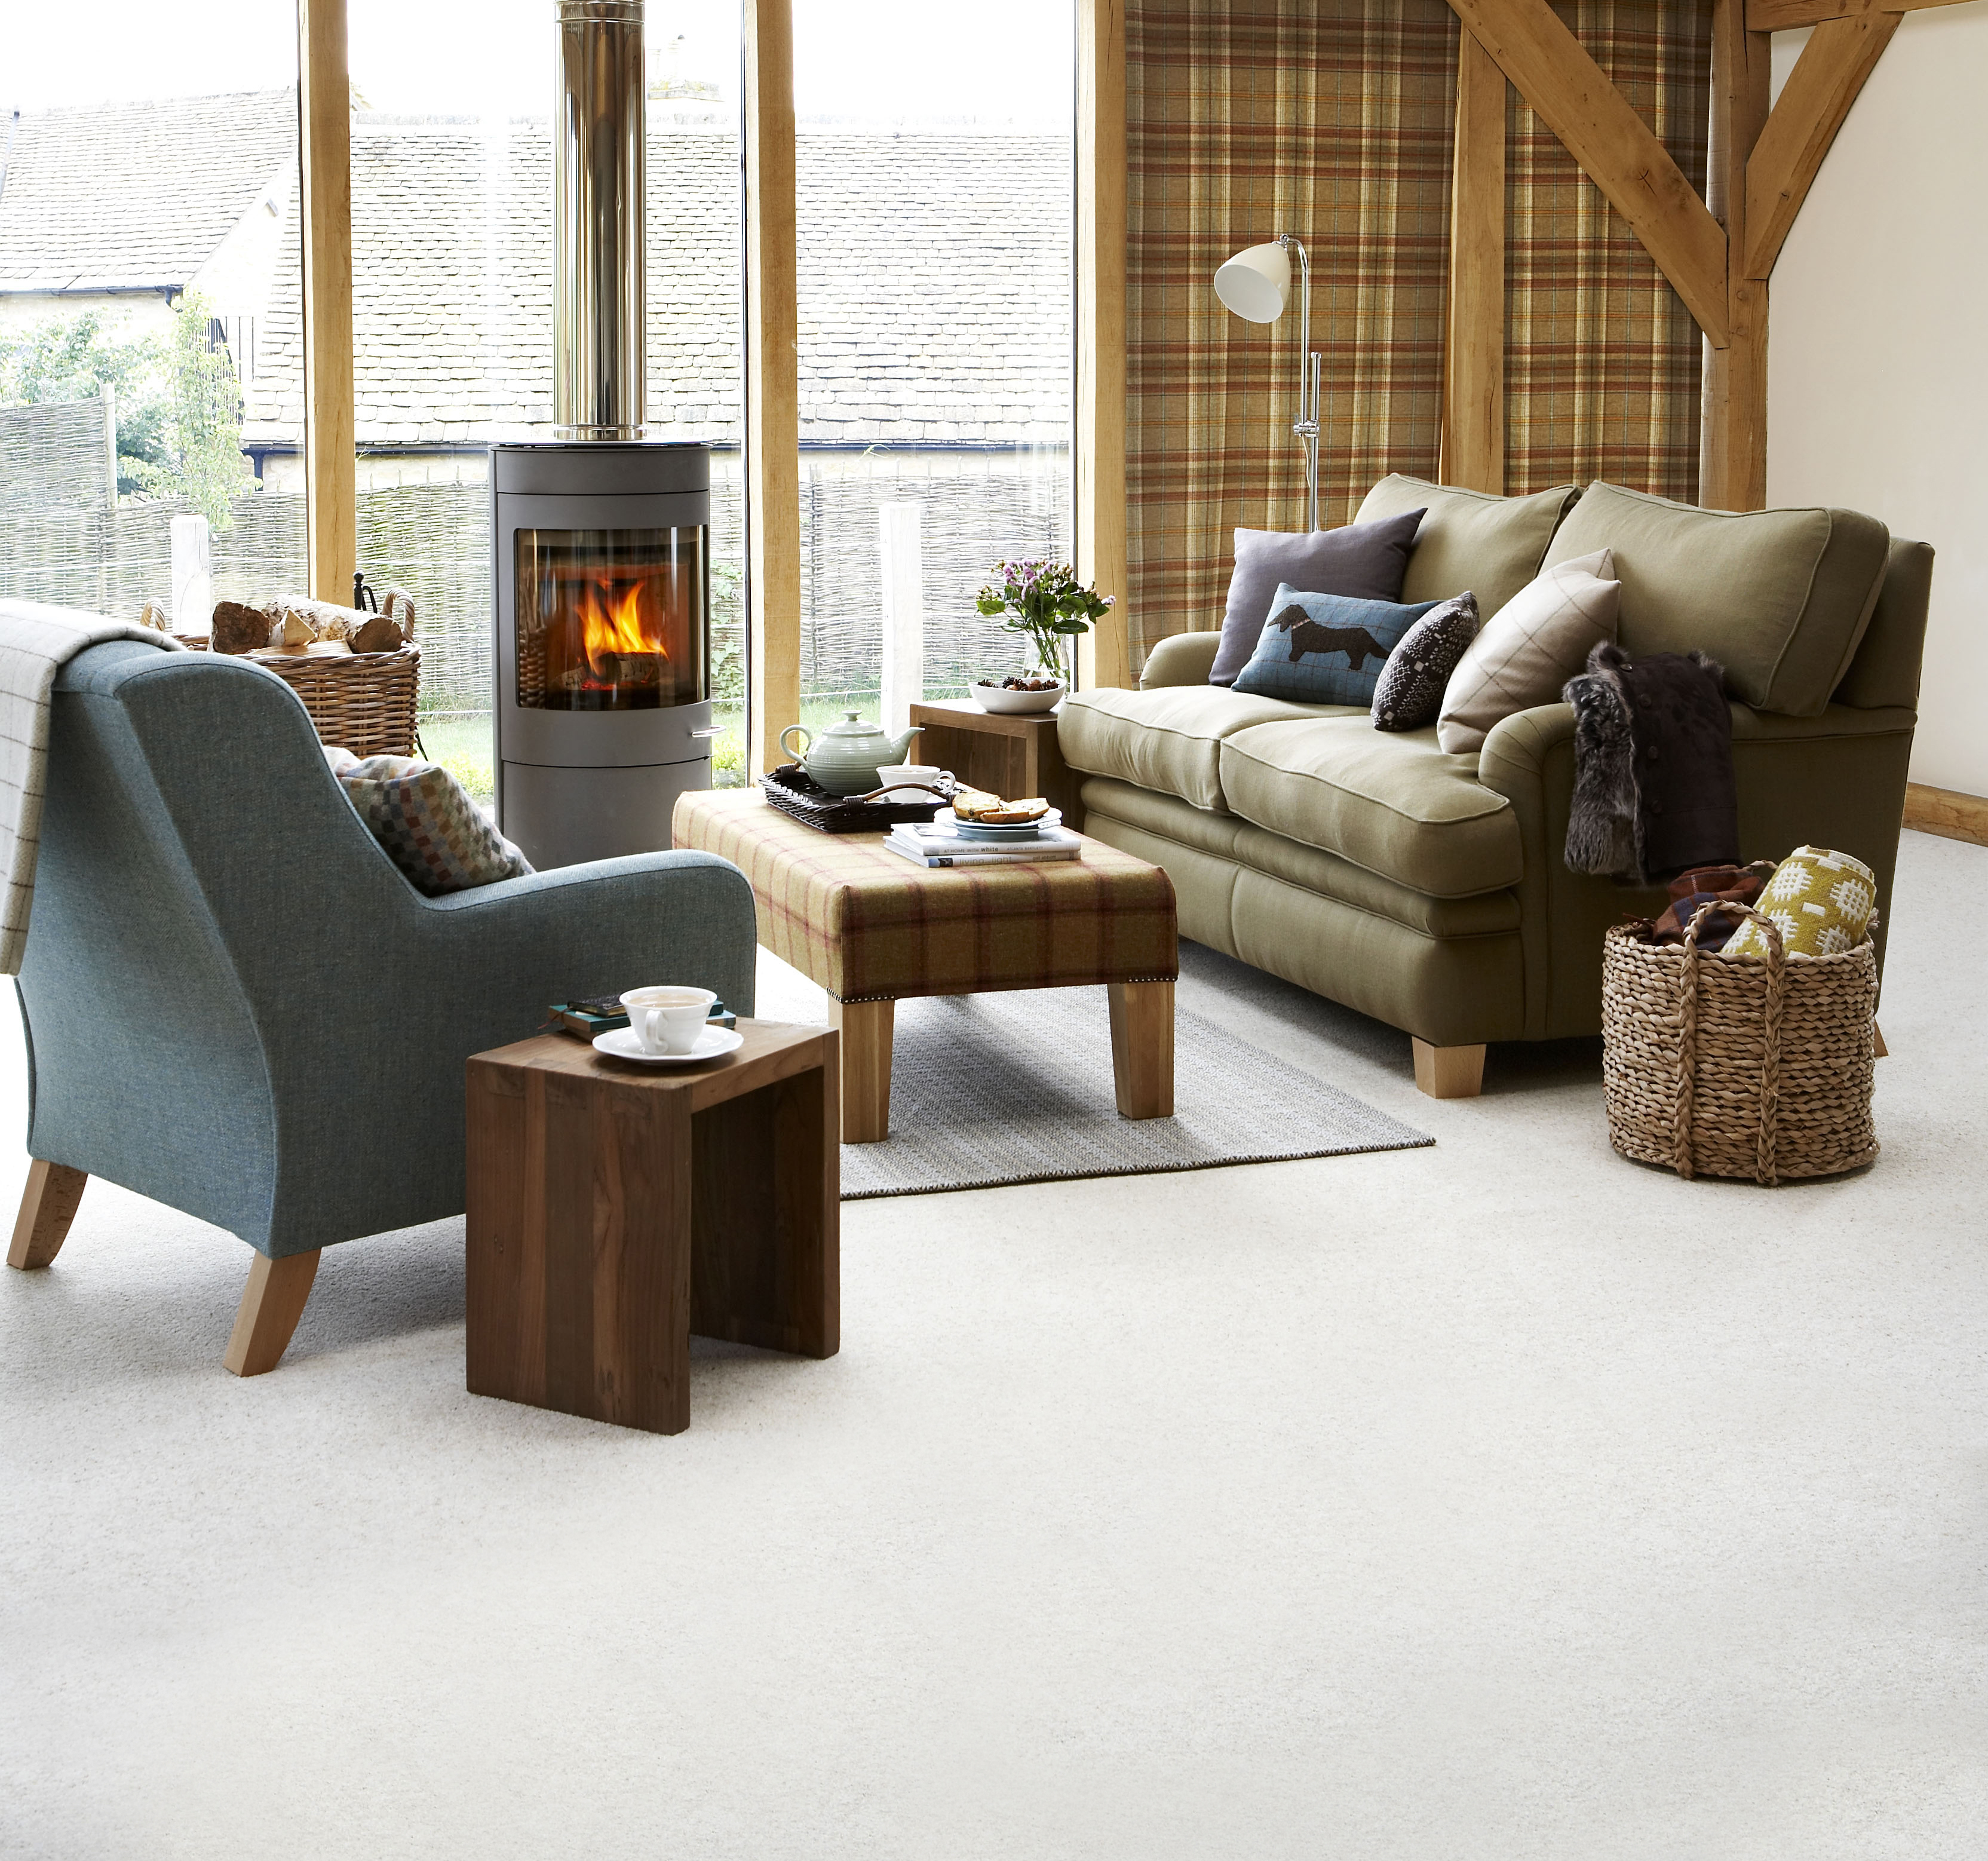 Independent retailers the best place to buy carpet - Which? December 2019